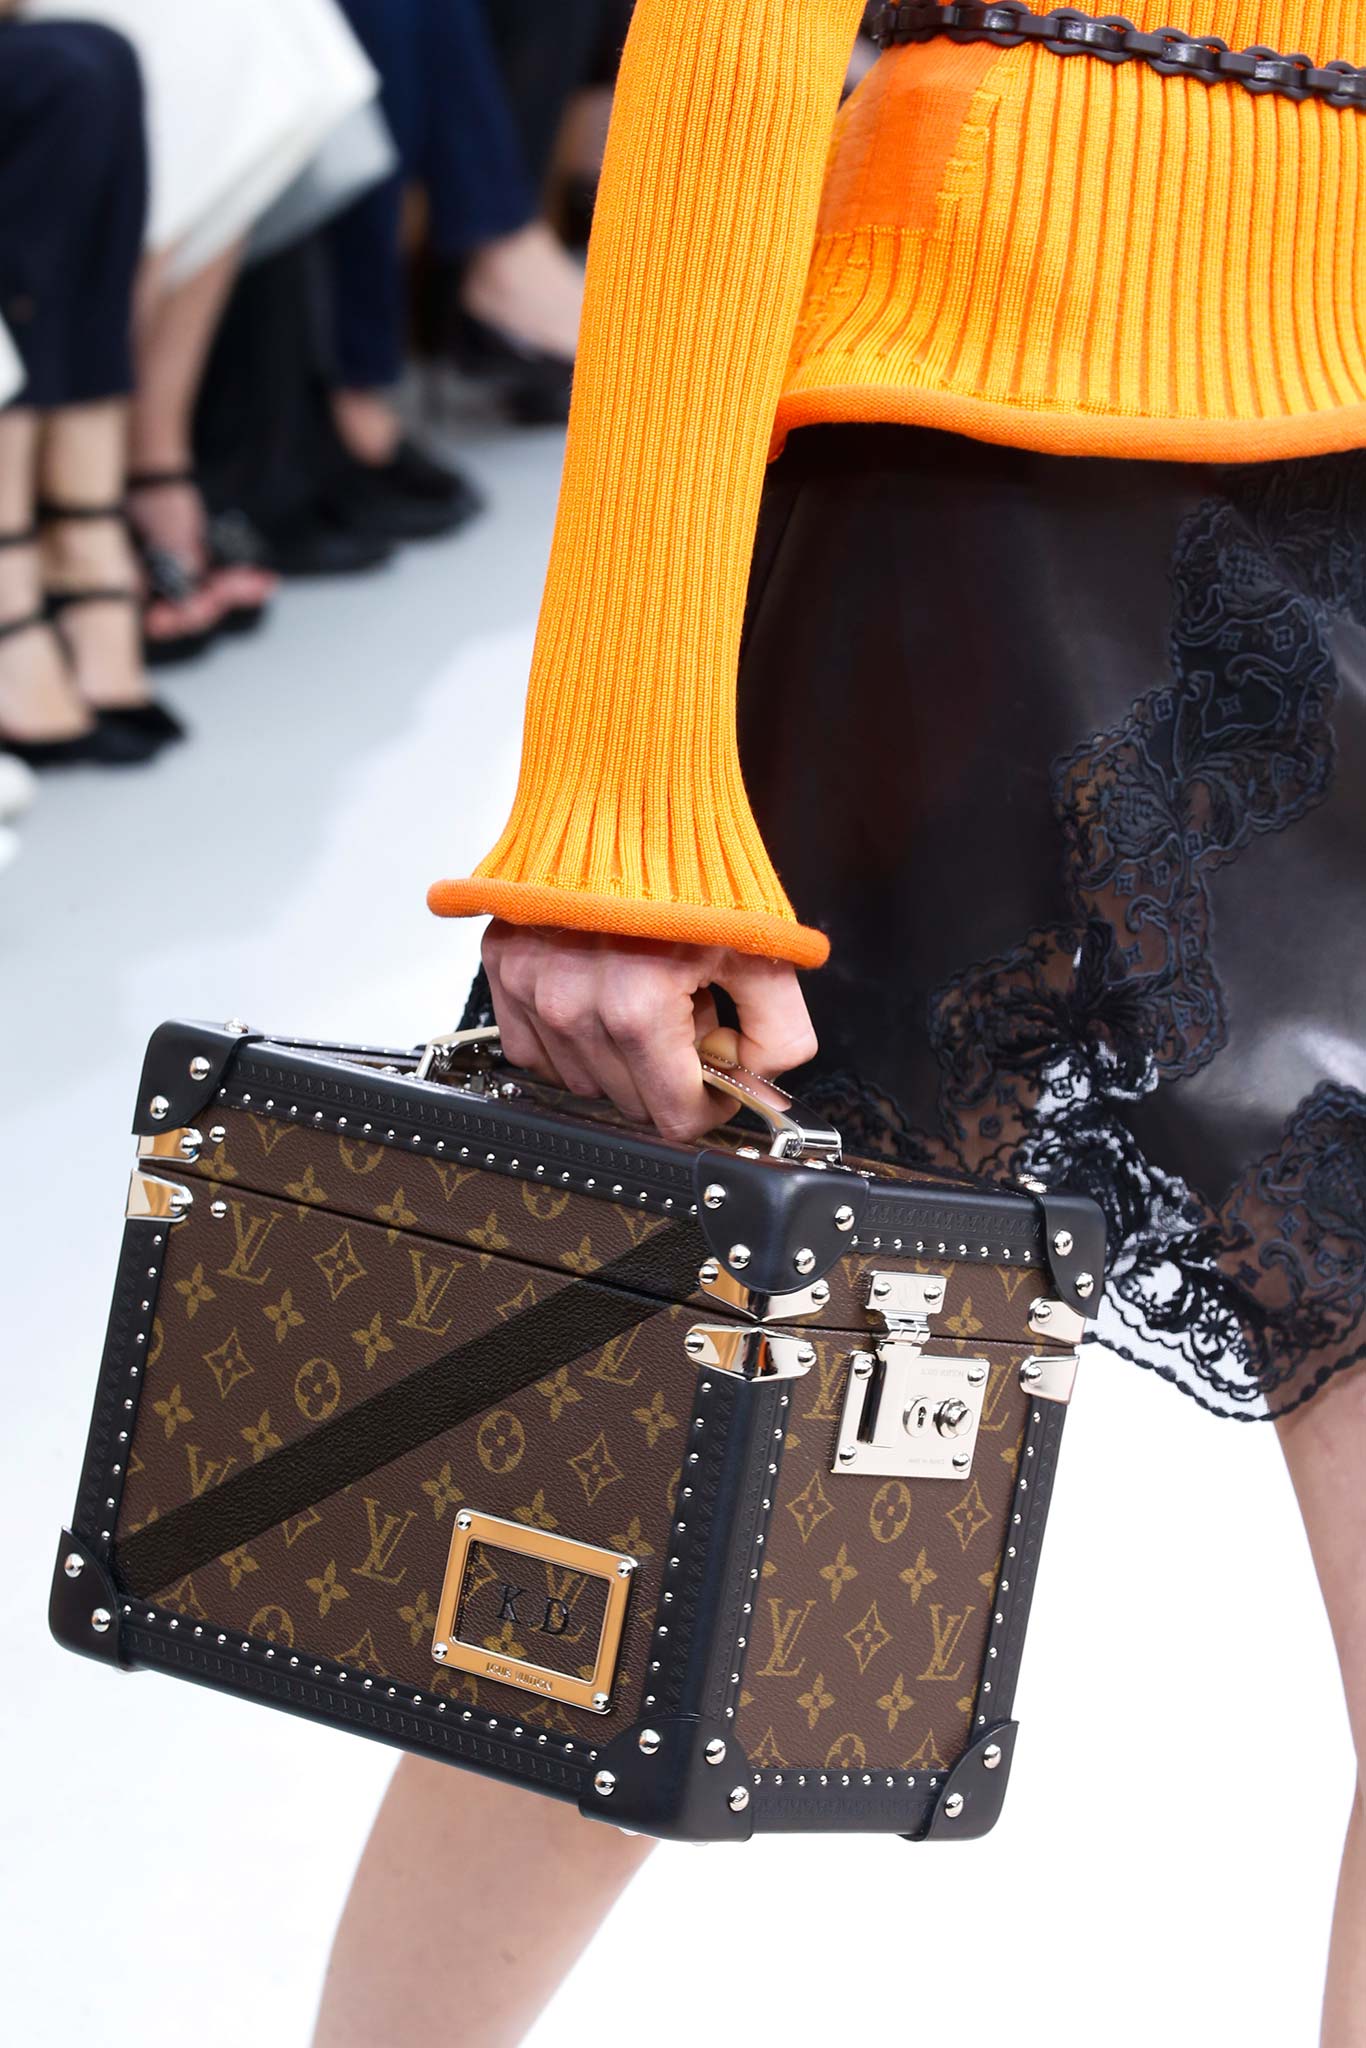 Louis Vuitton Fall/Winter 2015 Runway Bag Collection featuring Mini Trunks – Spotted Fashion